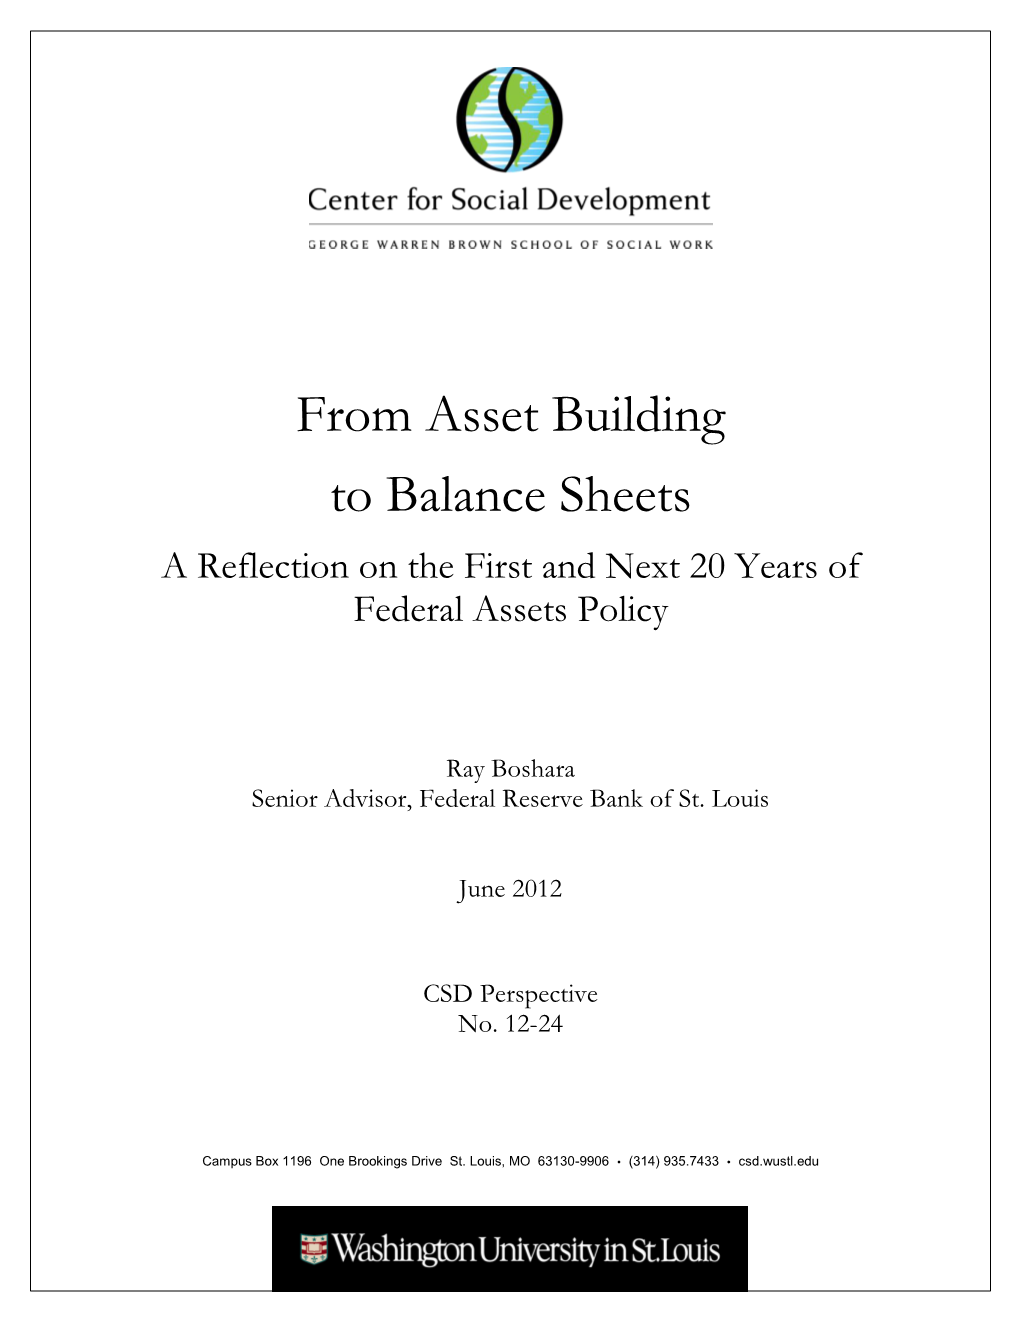 From Asset Building to Balance Sheets: a Reflection on the First and Next 20 Years of Federal Assets Policy